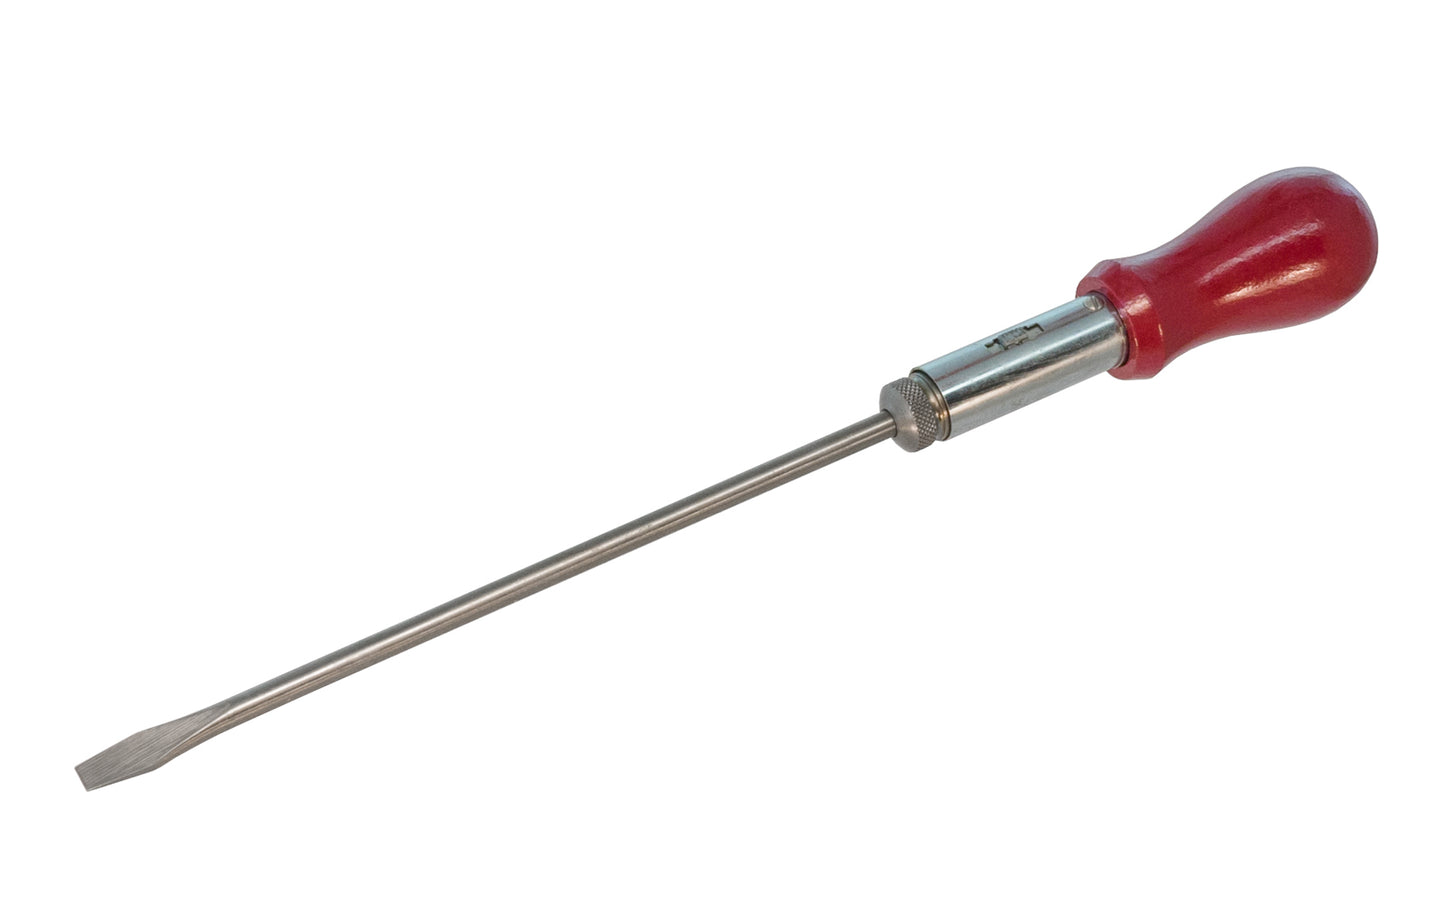 Spiralux screwdriver with slotted. Fully heat treated & tempered bar for long life. Ratcheting Spiralux screwdriver - 8" long blade (200 mm). Model No. 6208.  Brand new old stock.   Made in Gillingham, Kent. England